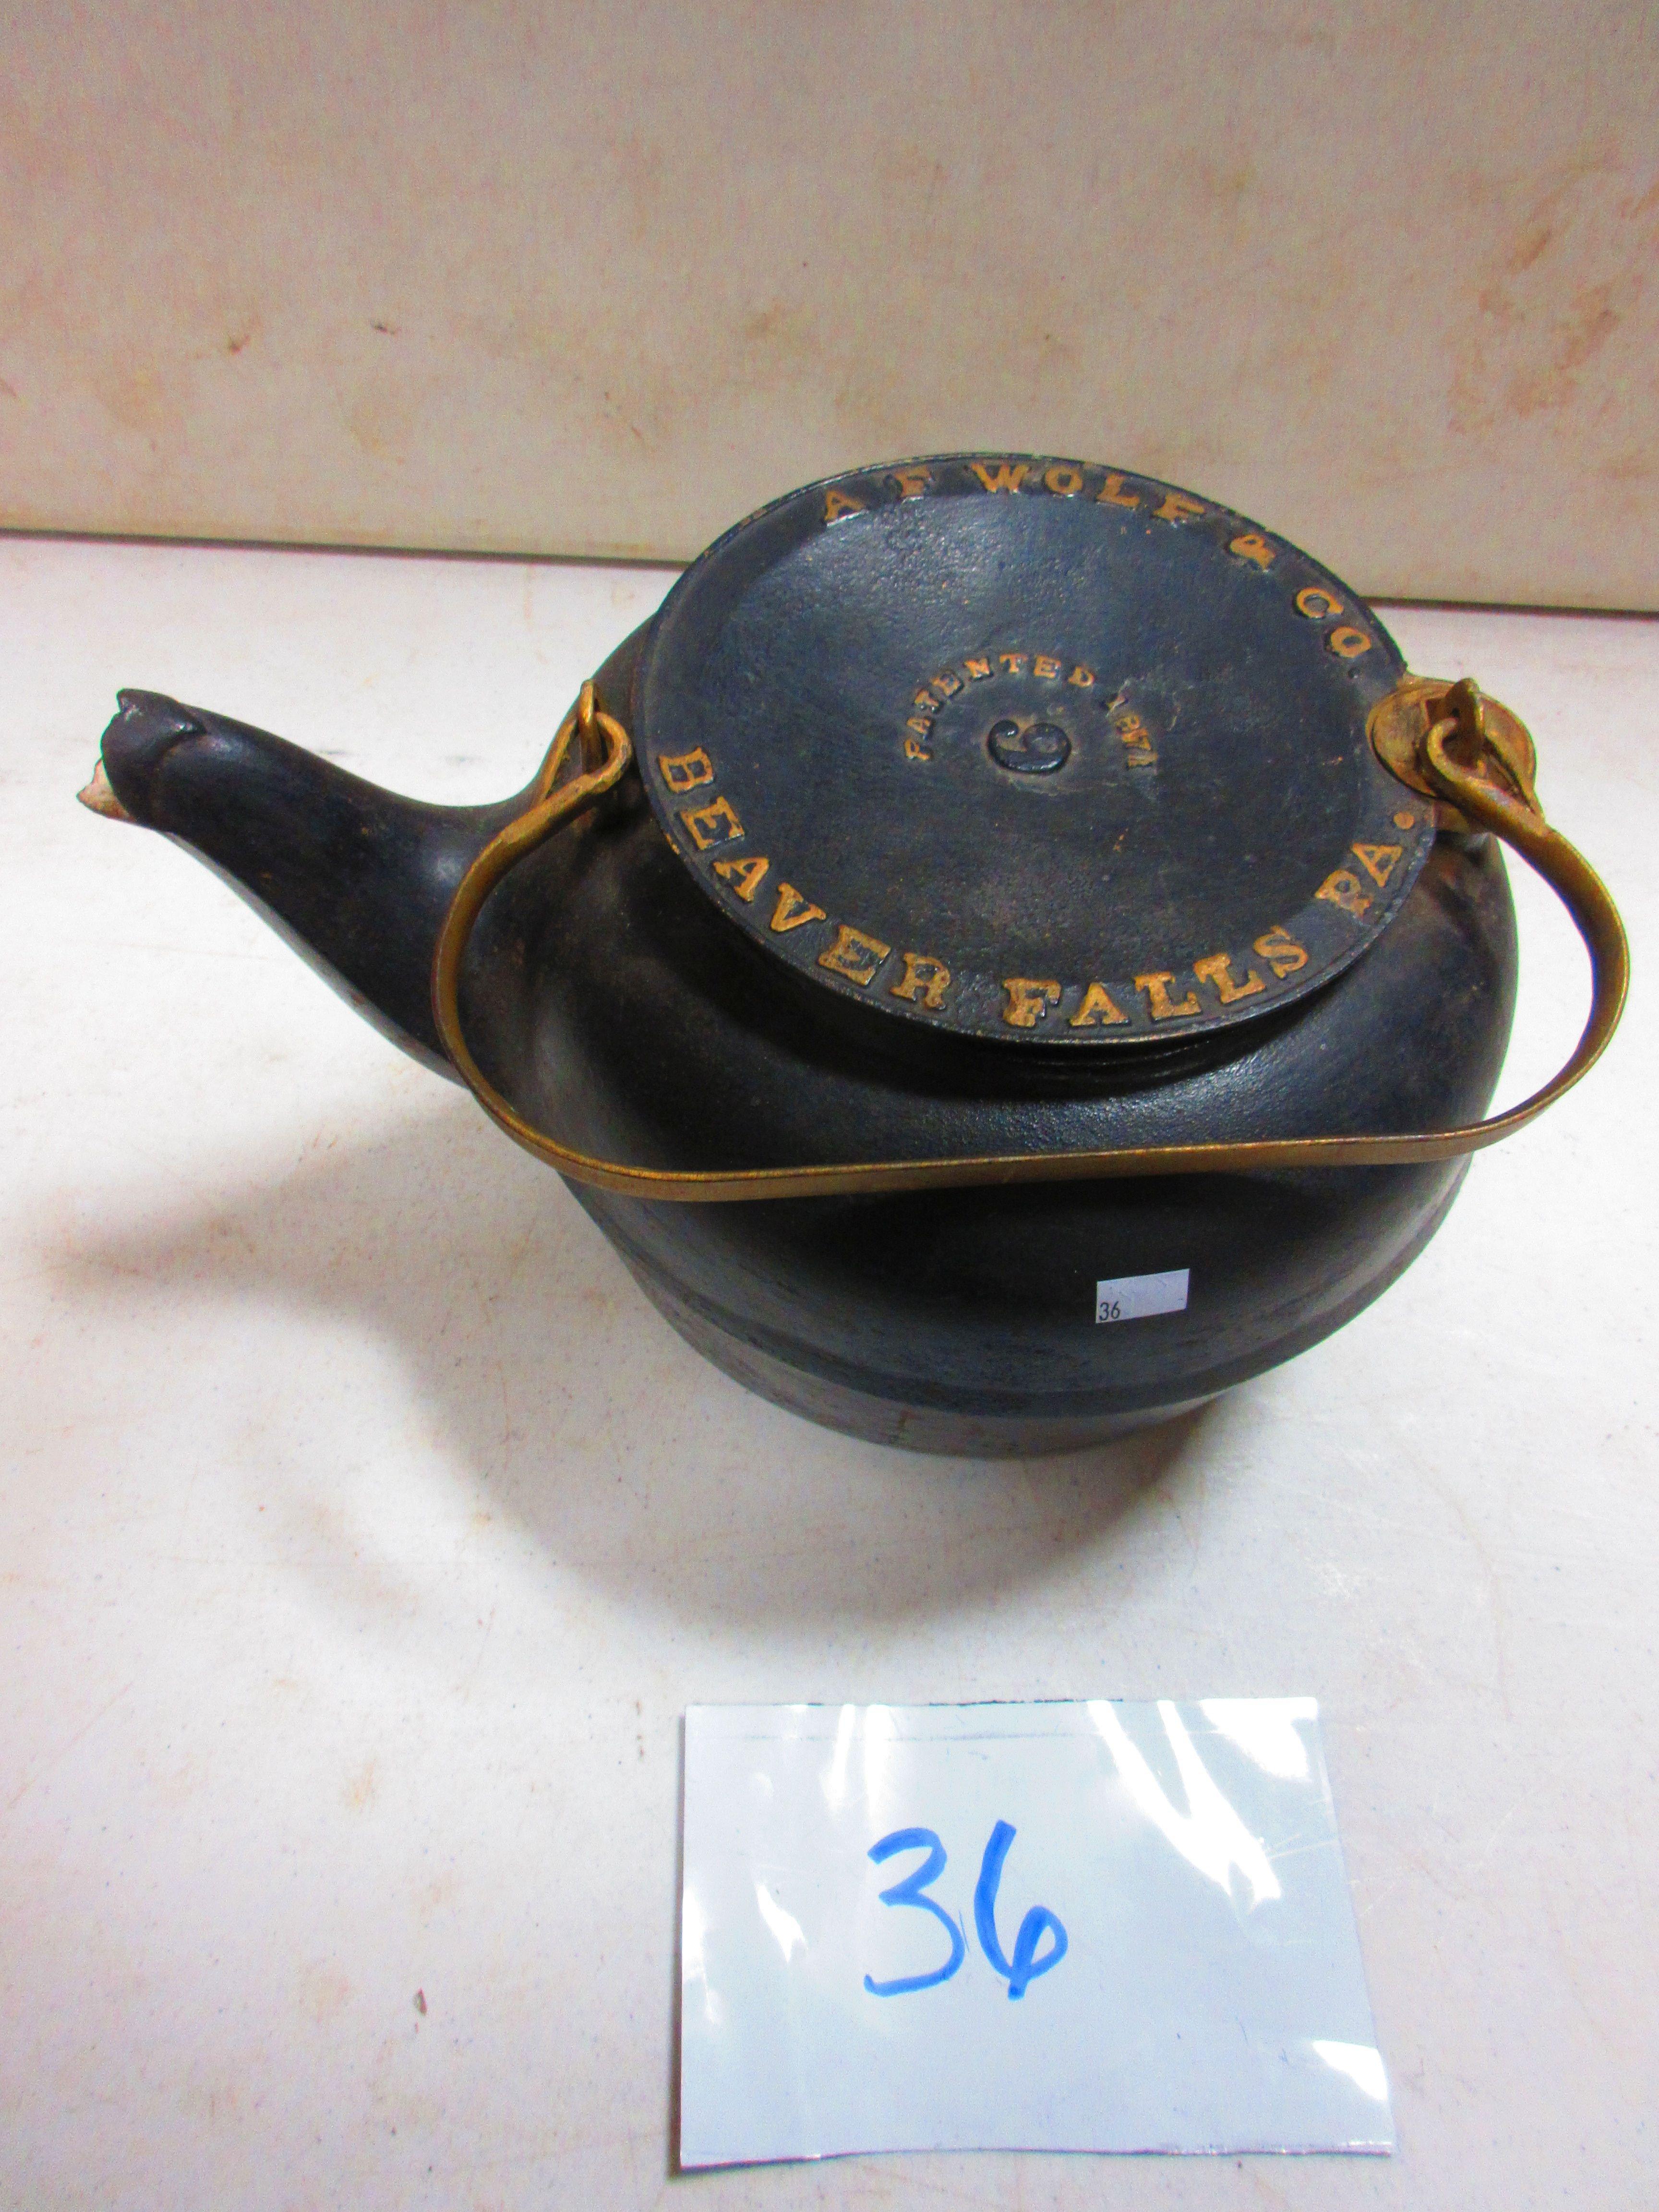 A.F. WOLF & CO. BEAVER FALLS PA. # 6 CAST IRON KETTLE WITH HAANDFORGED BRASS HANDLE